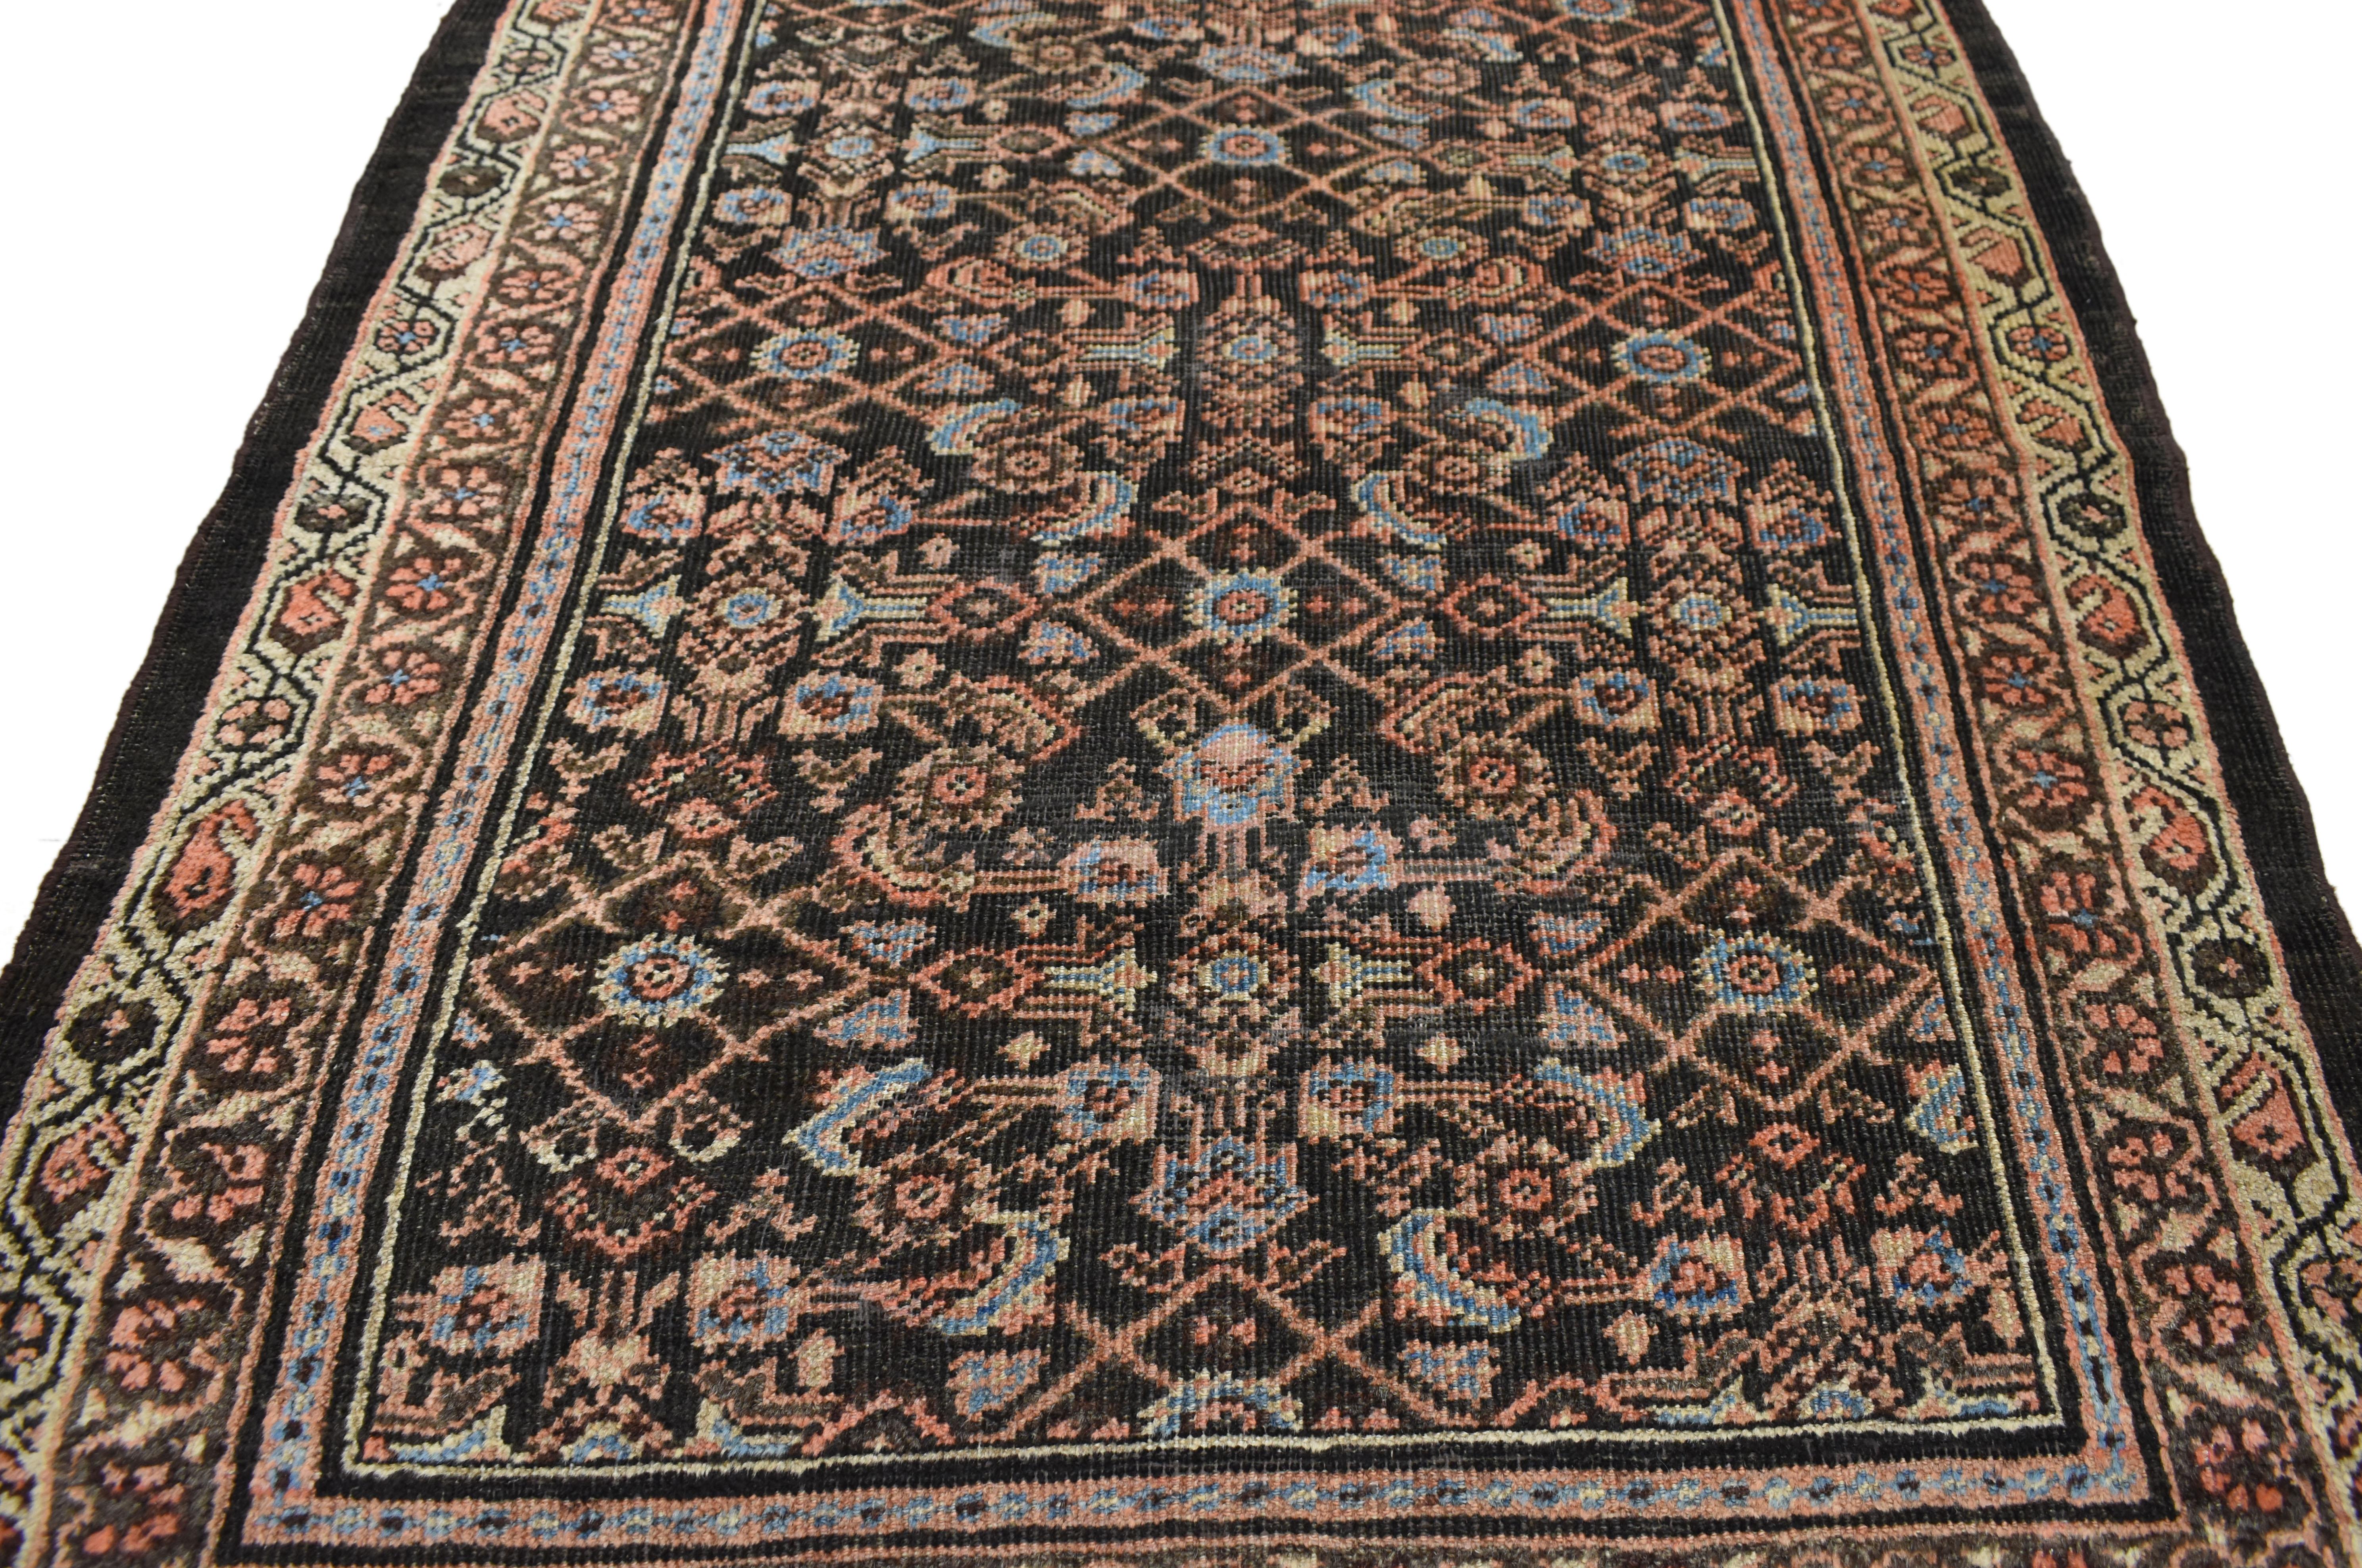 72354, antique Persian Malayer runner, wide hallway carpet runner. This hand knotted wool antique Persian Malayer runner features an all-over Herati design on an abrashed coffee field. A highly stylized rendition of the classic pattern densely fills